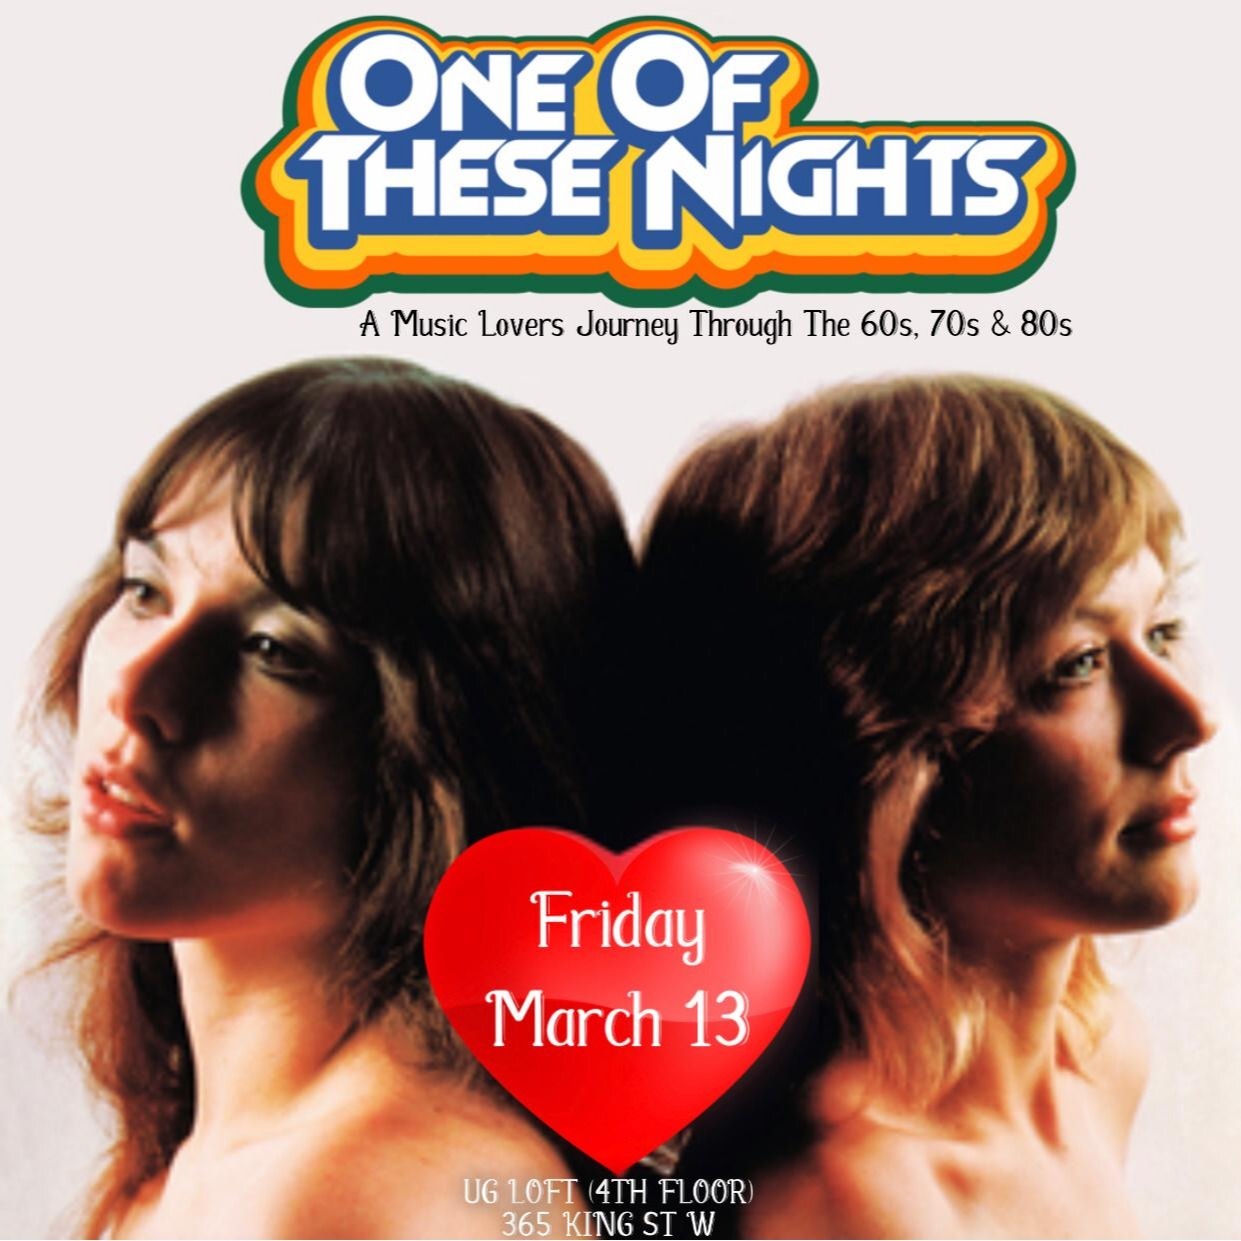 ONE OF THESE NIGHTS ~FRIDAY MARCH 13th